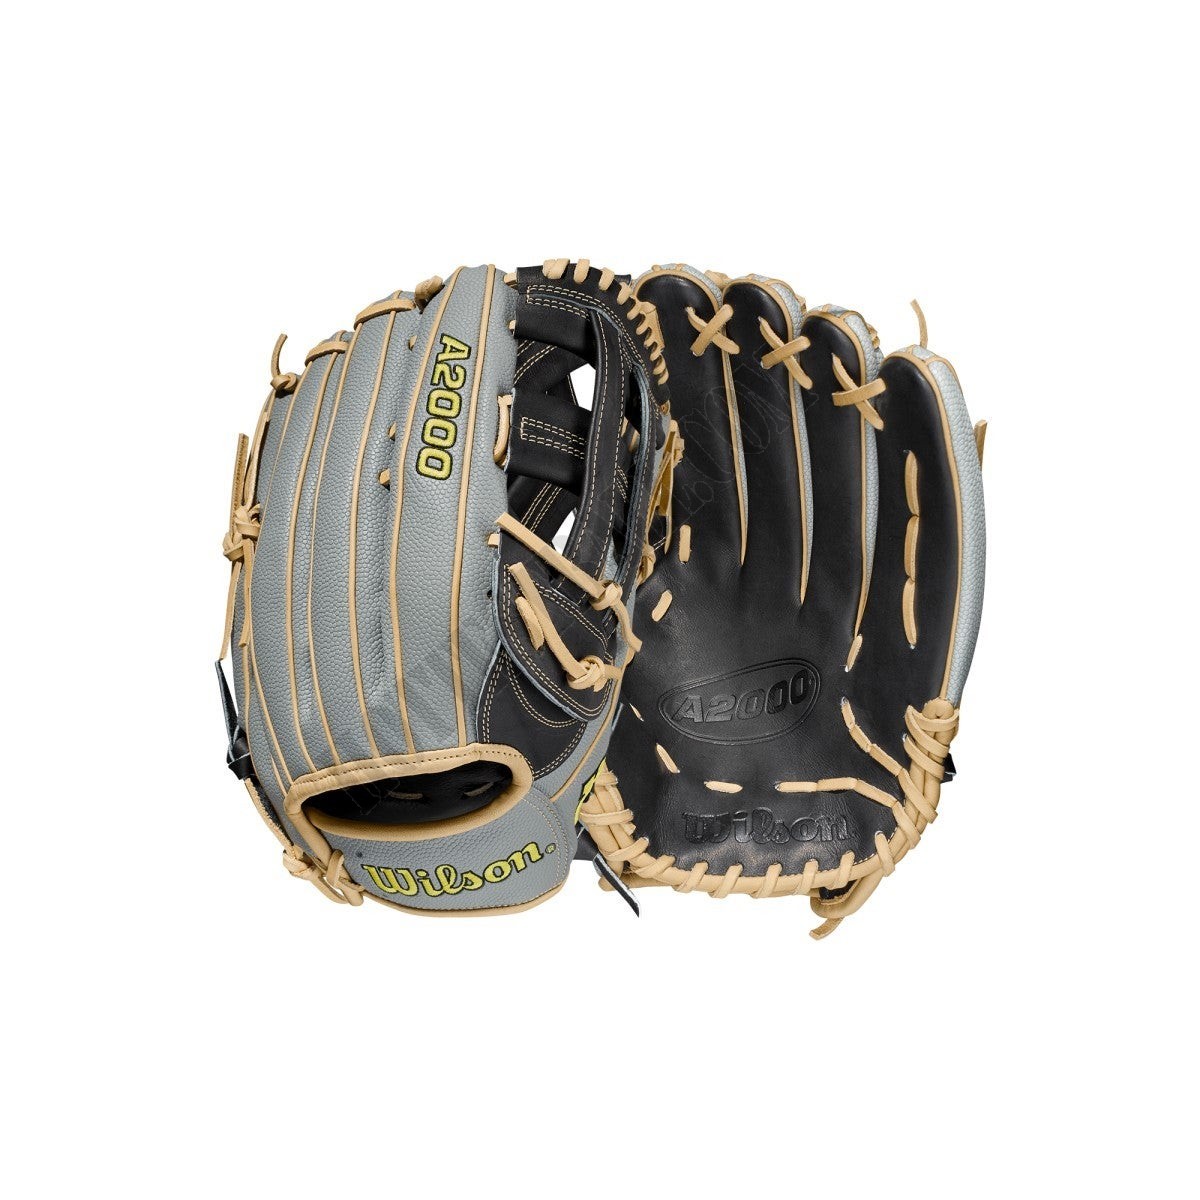 2021 A2000 1799SS 12.75" Outfield Baseball Glove ● Wilson Promotions - 2021 A2000 1799SS 12.75" Outfield Baseball Glove ● Wilson Promotions